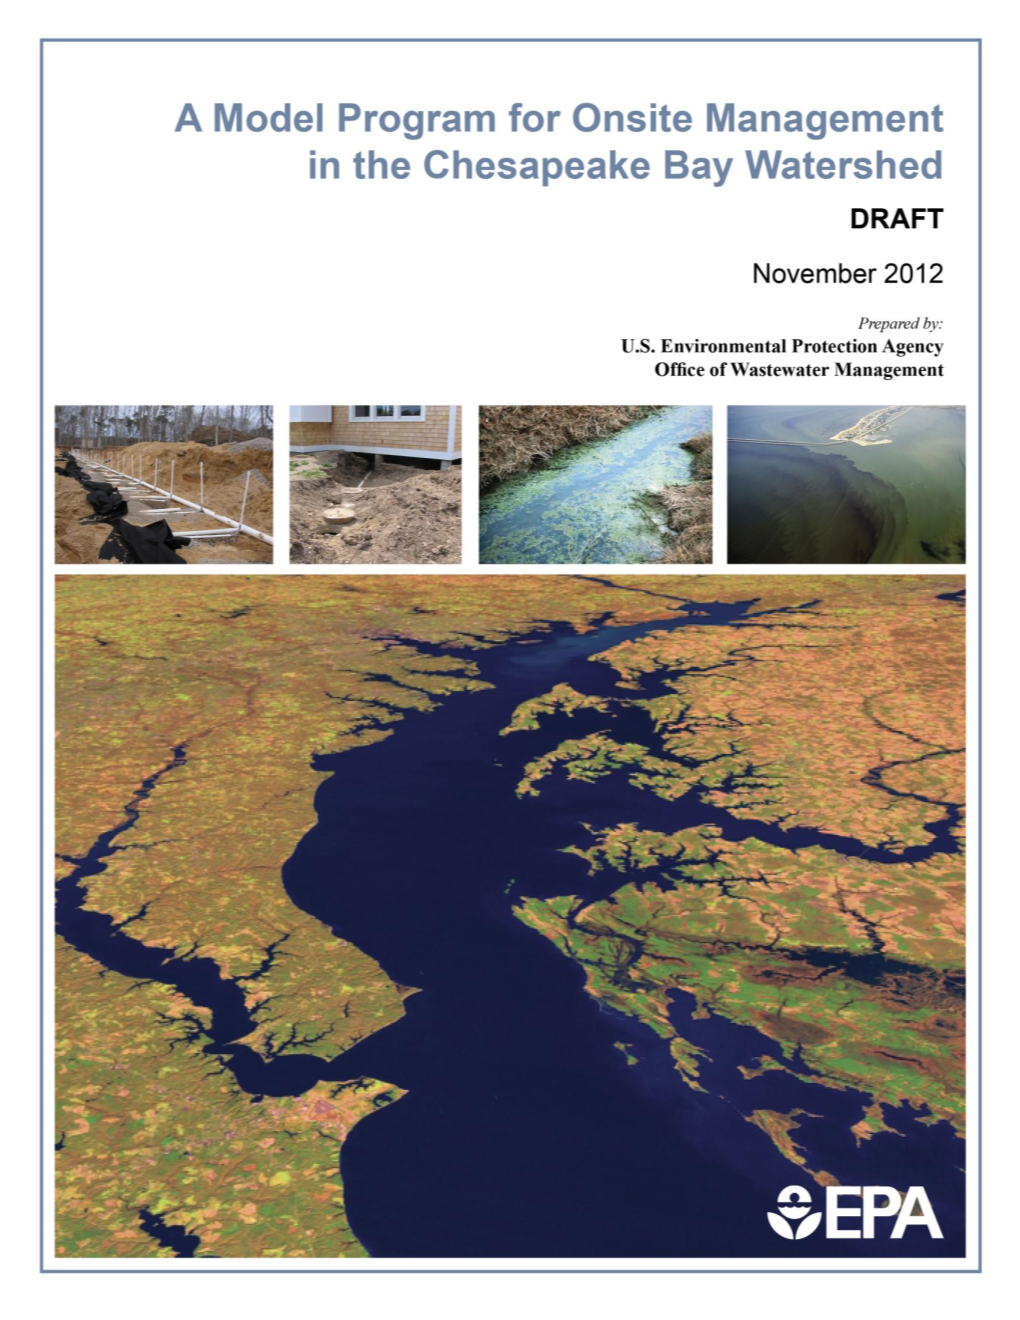 A Model Program for Onsite System Management in the Chesapeake Bay Watershed